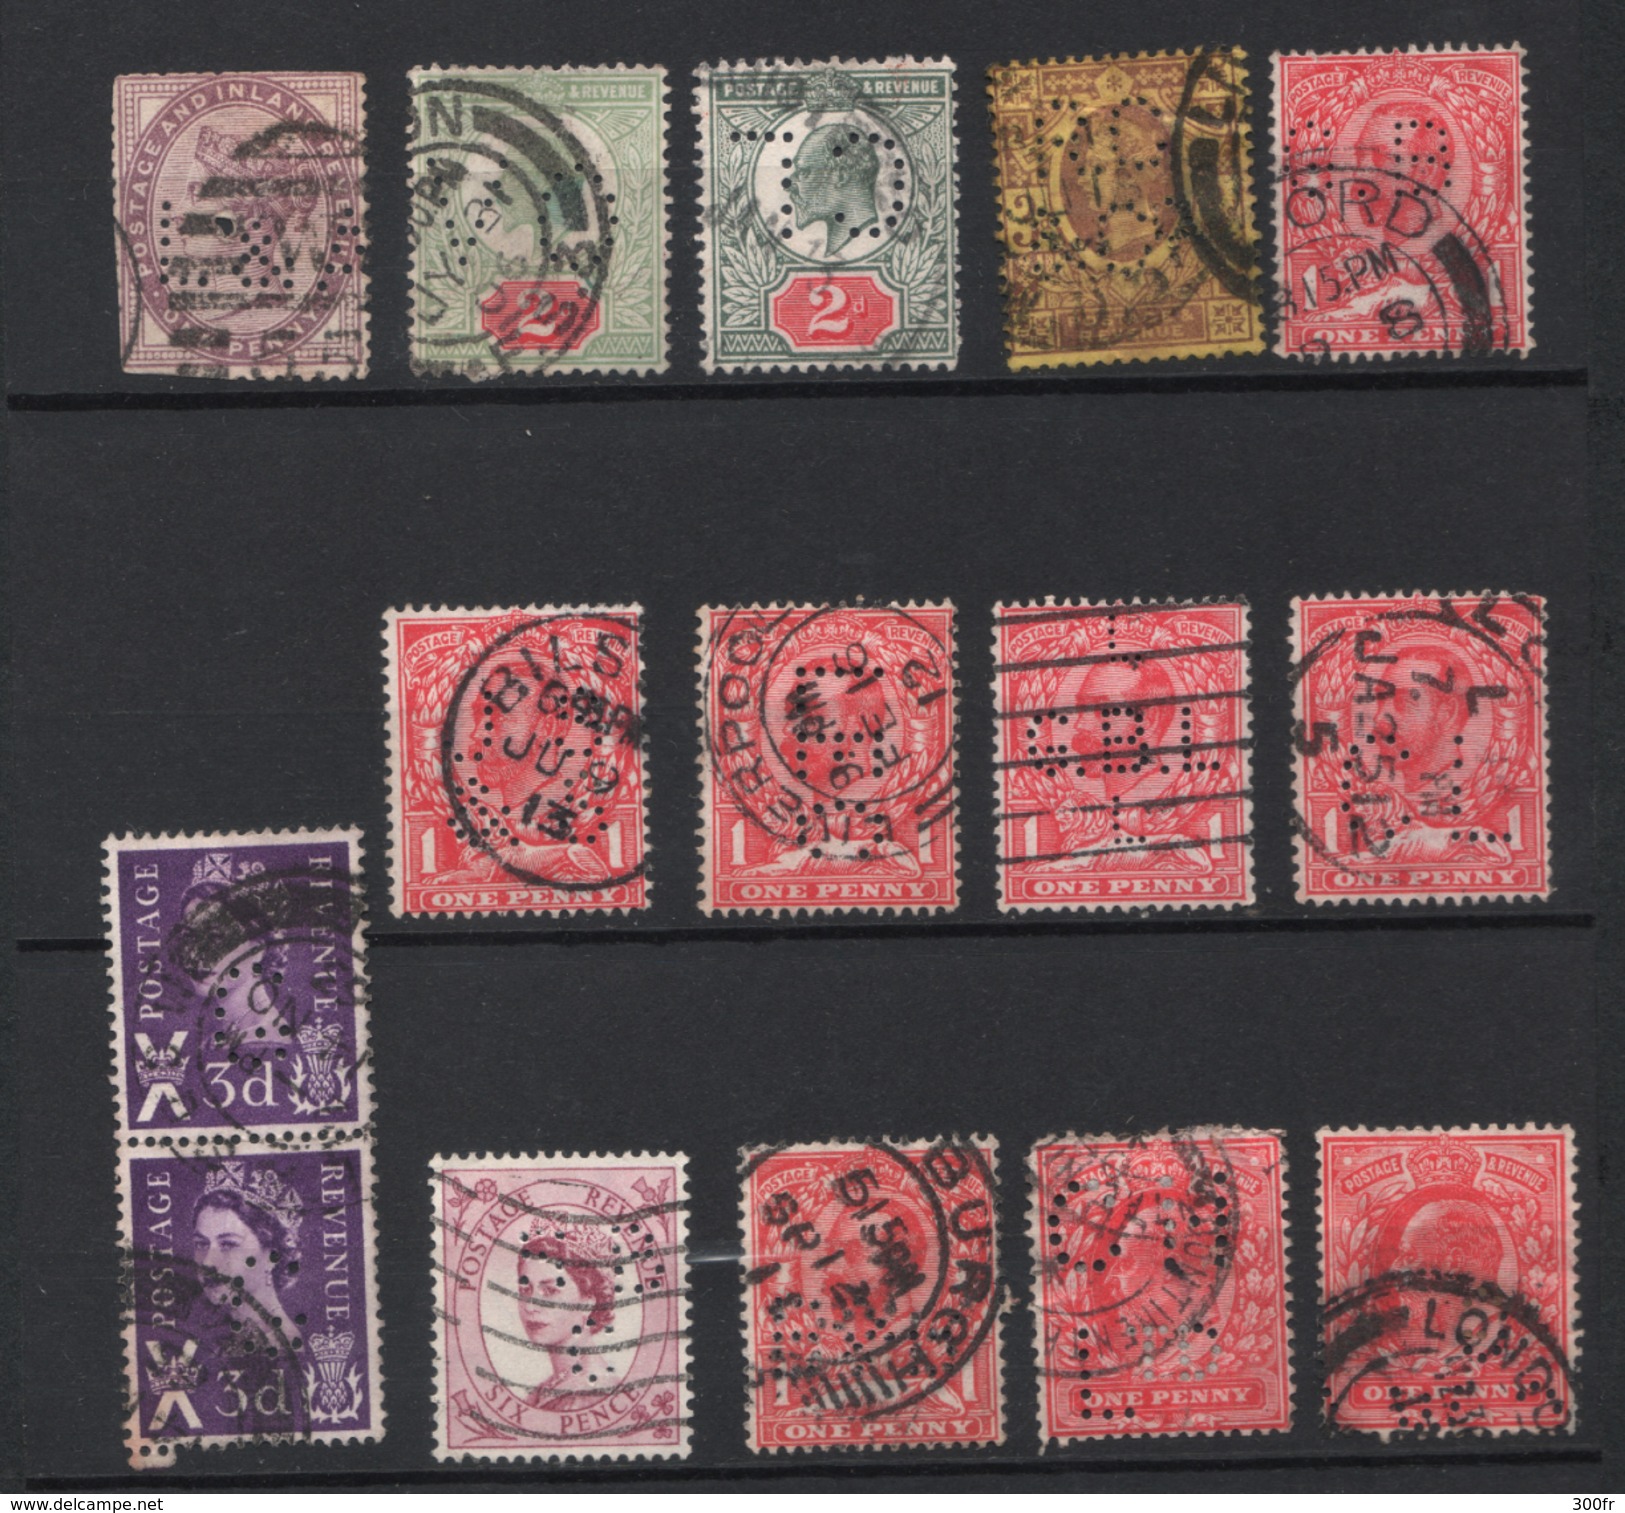 GREAT BRITAIN PERFIN STAMPS PERFORES TIMBRES ANGLATERRE C&G, L, CL GB GBL LEC  B&R G L&A OV R.0 &Oo - Perfins